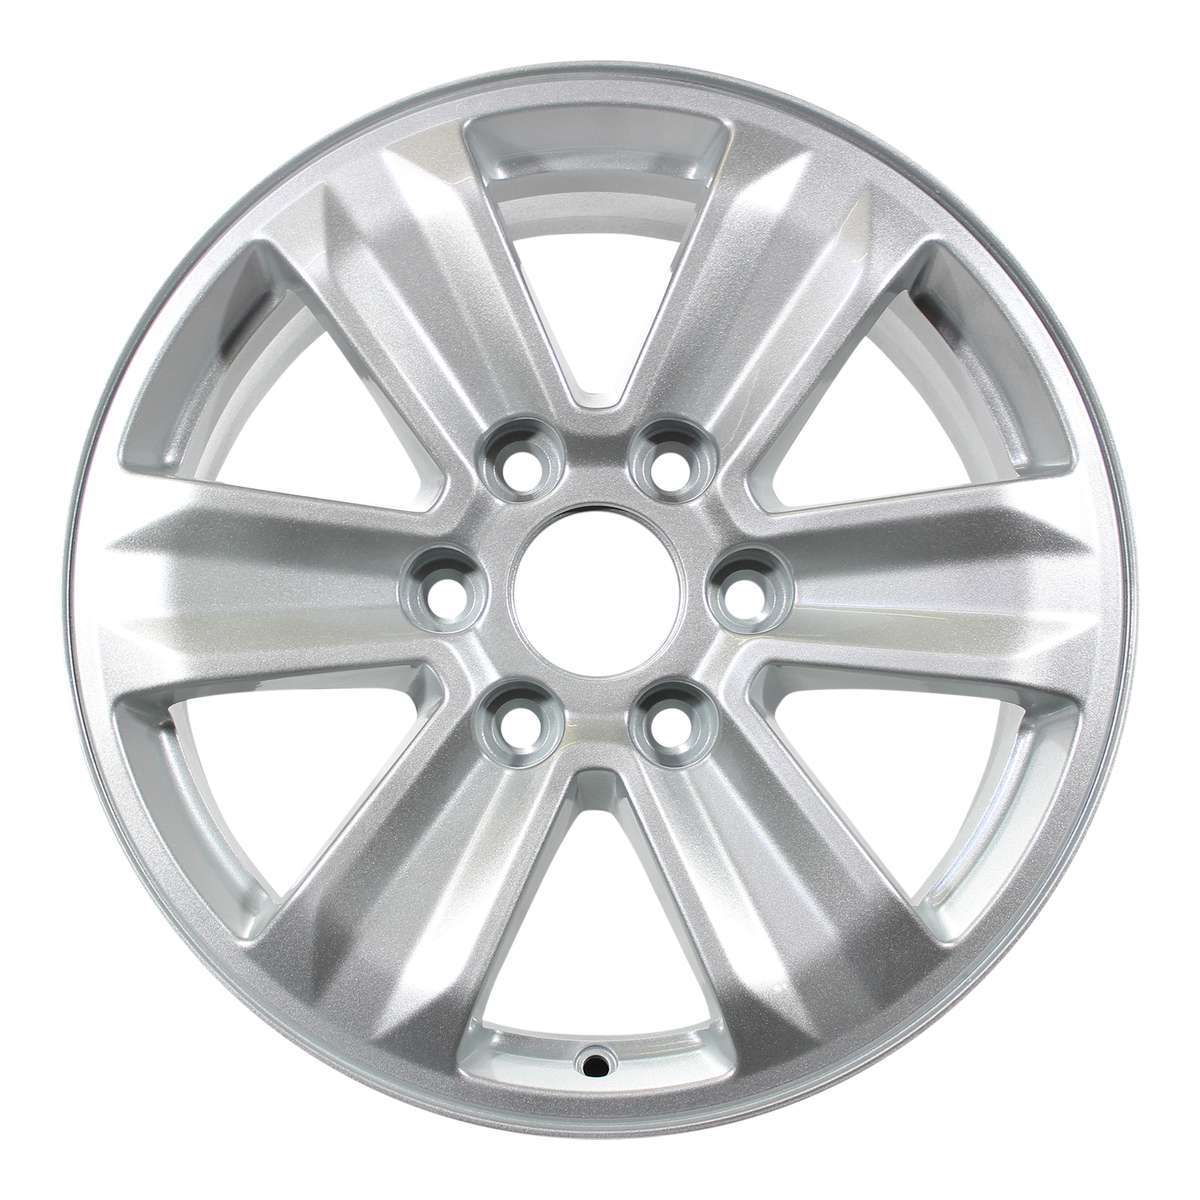 2020 Ford F-150 New 17" Replacement Wheel Rim RW3995S